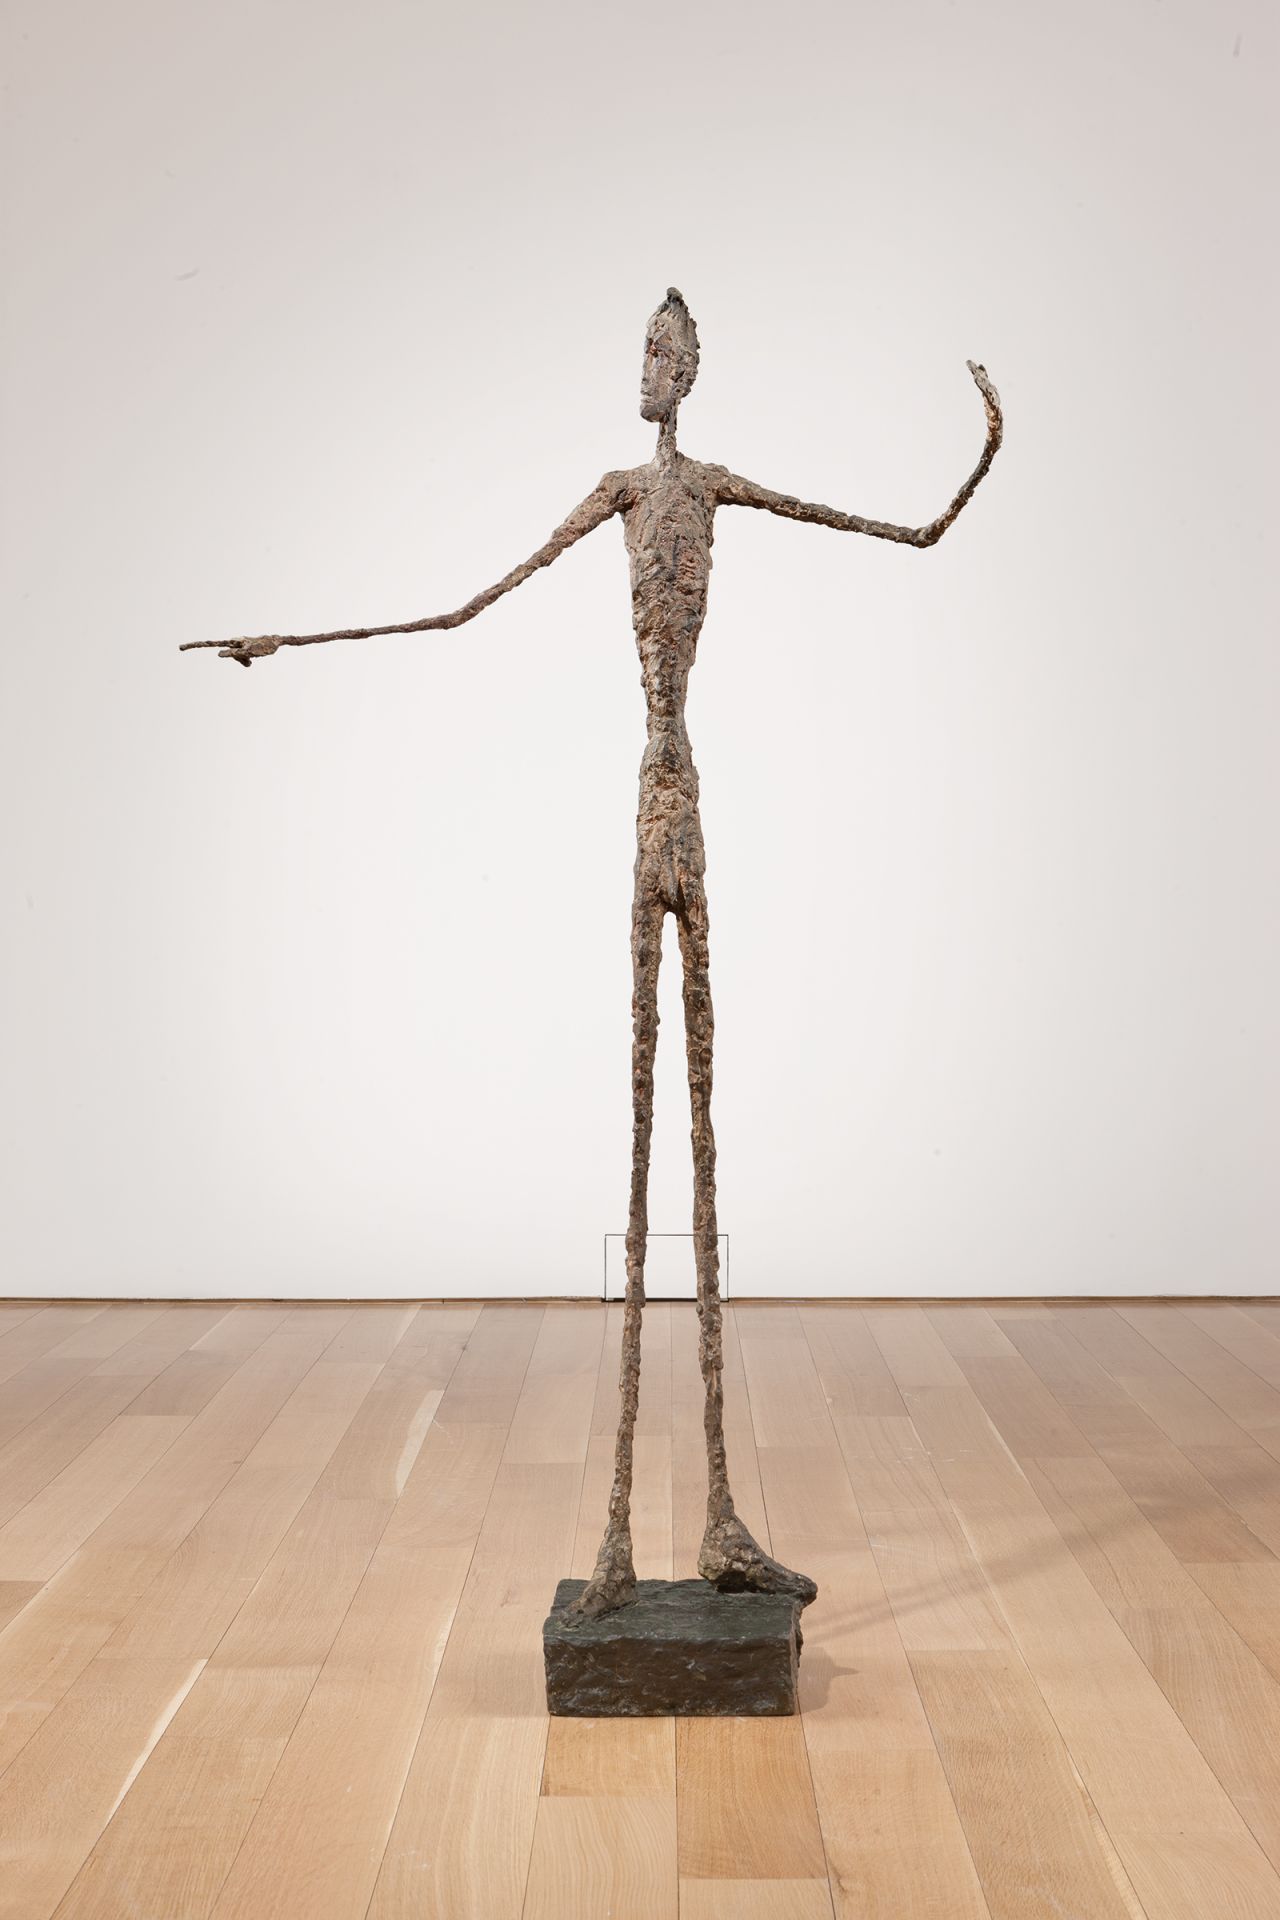 "L'Homme au doigt" (1947) by Alberto Giacometti